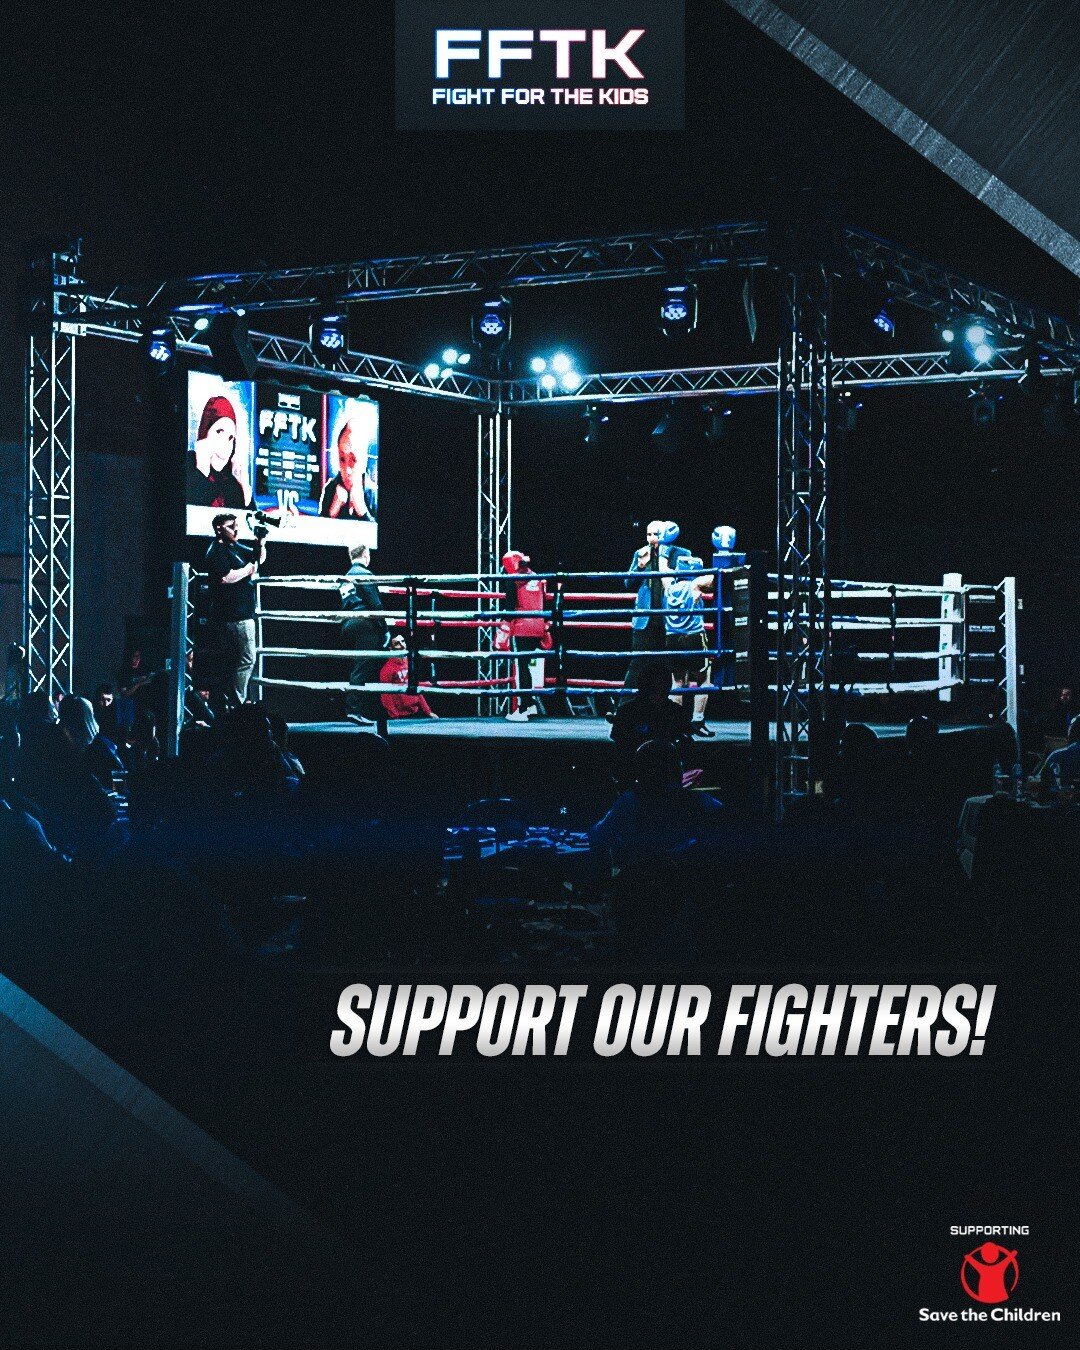 Buy your tickets now to support the amazing fighters at FFTK! 🎟️

.
.
.
.

#fightforthekids #fftk #boxing #charity #charityboxing #boxingring #support #fighters #tickets #events